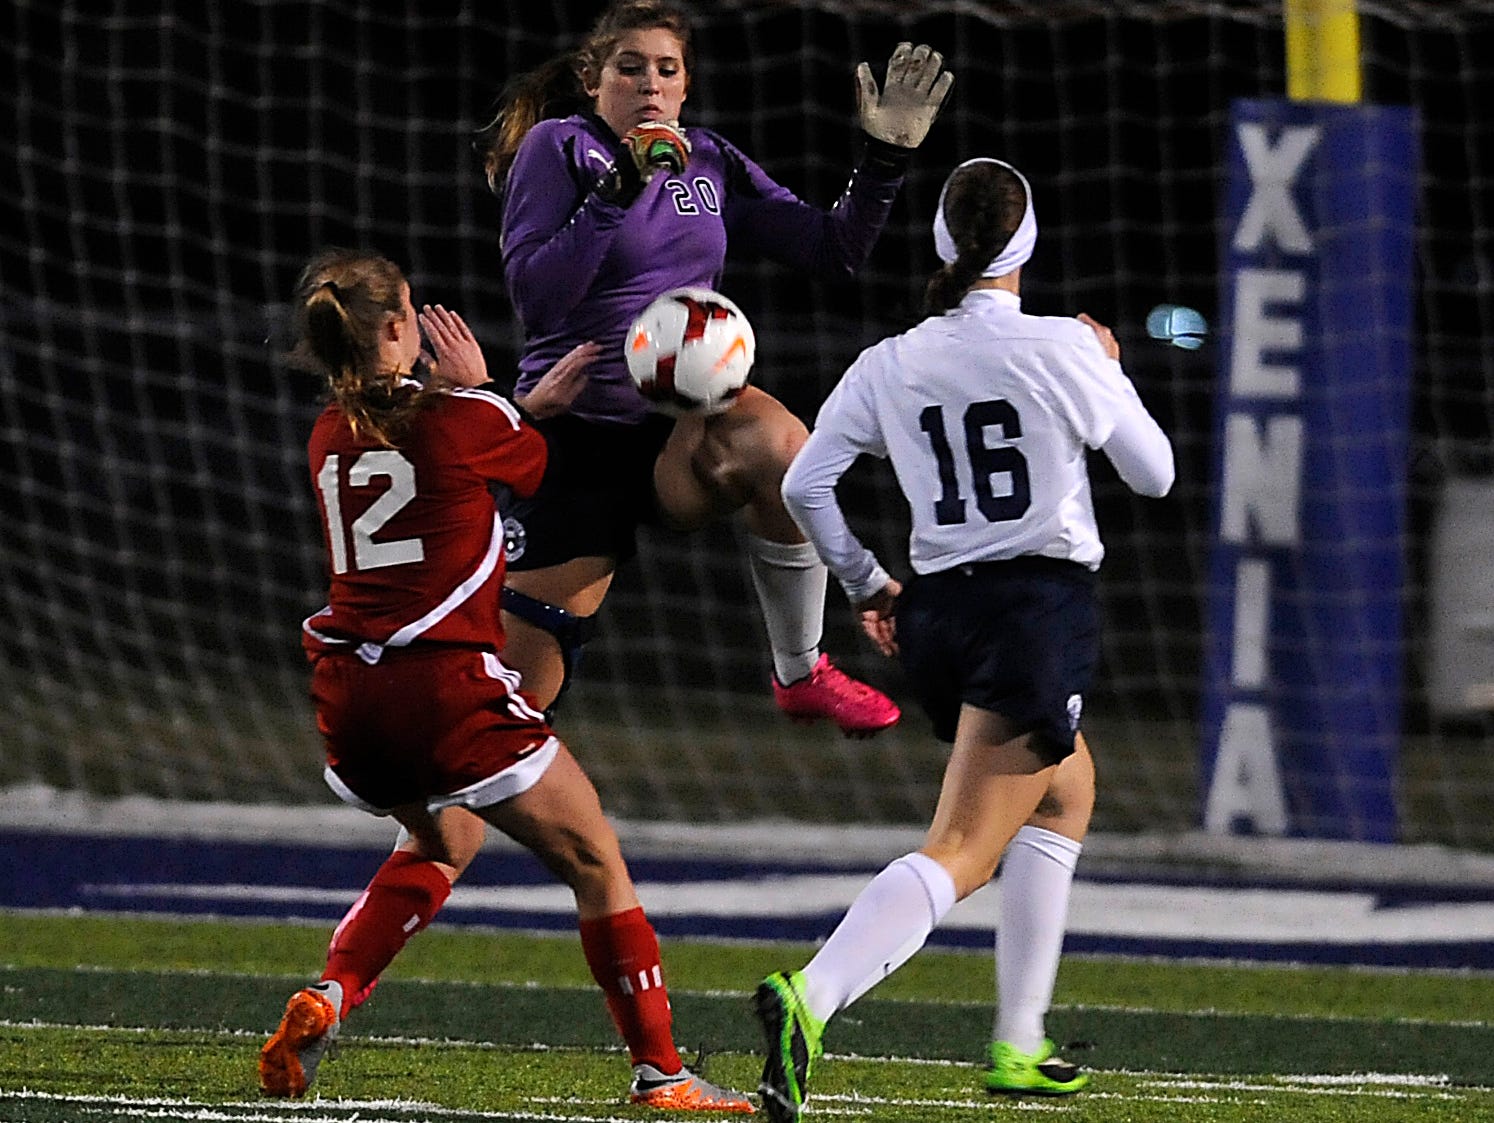 Granville goalkeeper Tori Long blocks a shot from Indian Hill Anna Podojil as defender Emily Kauchak recovers back. Long battled through injuries to help secure Granville's spot in the Division II State Championship with ten saves. They play number one Akron Hoban for the title Friday.